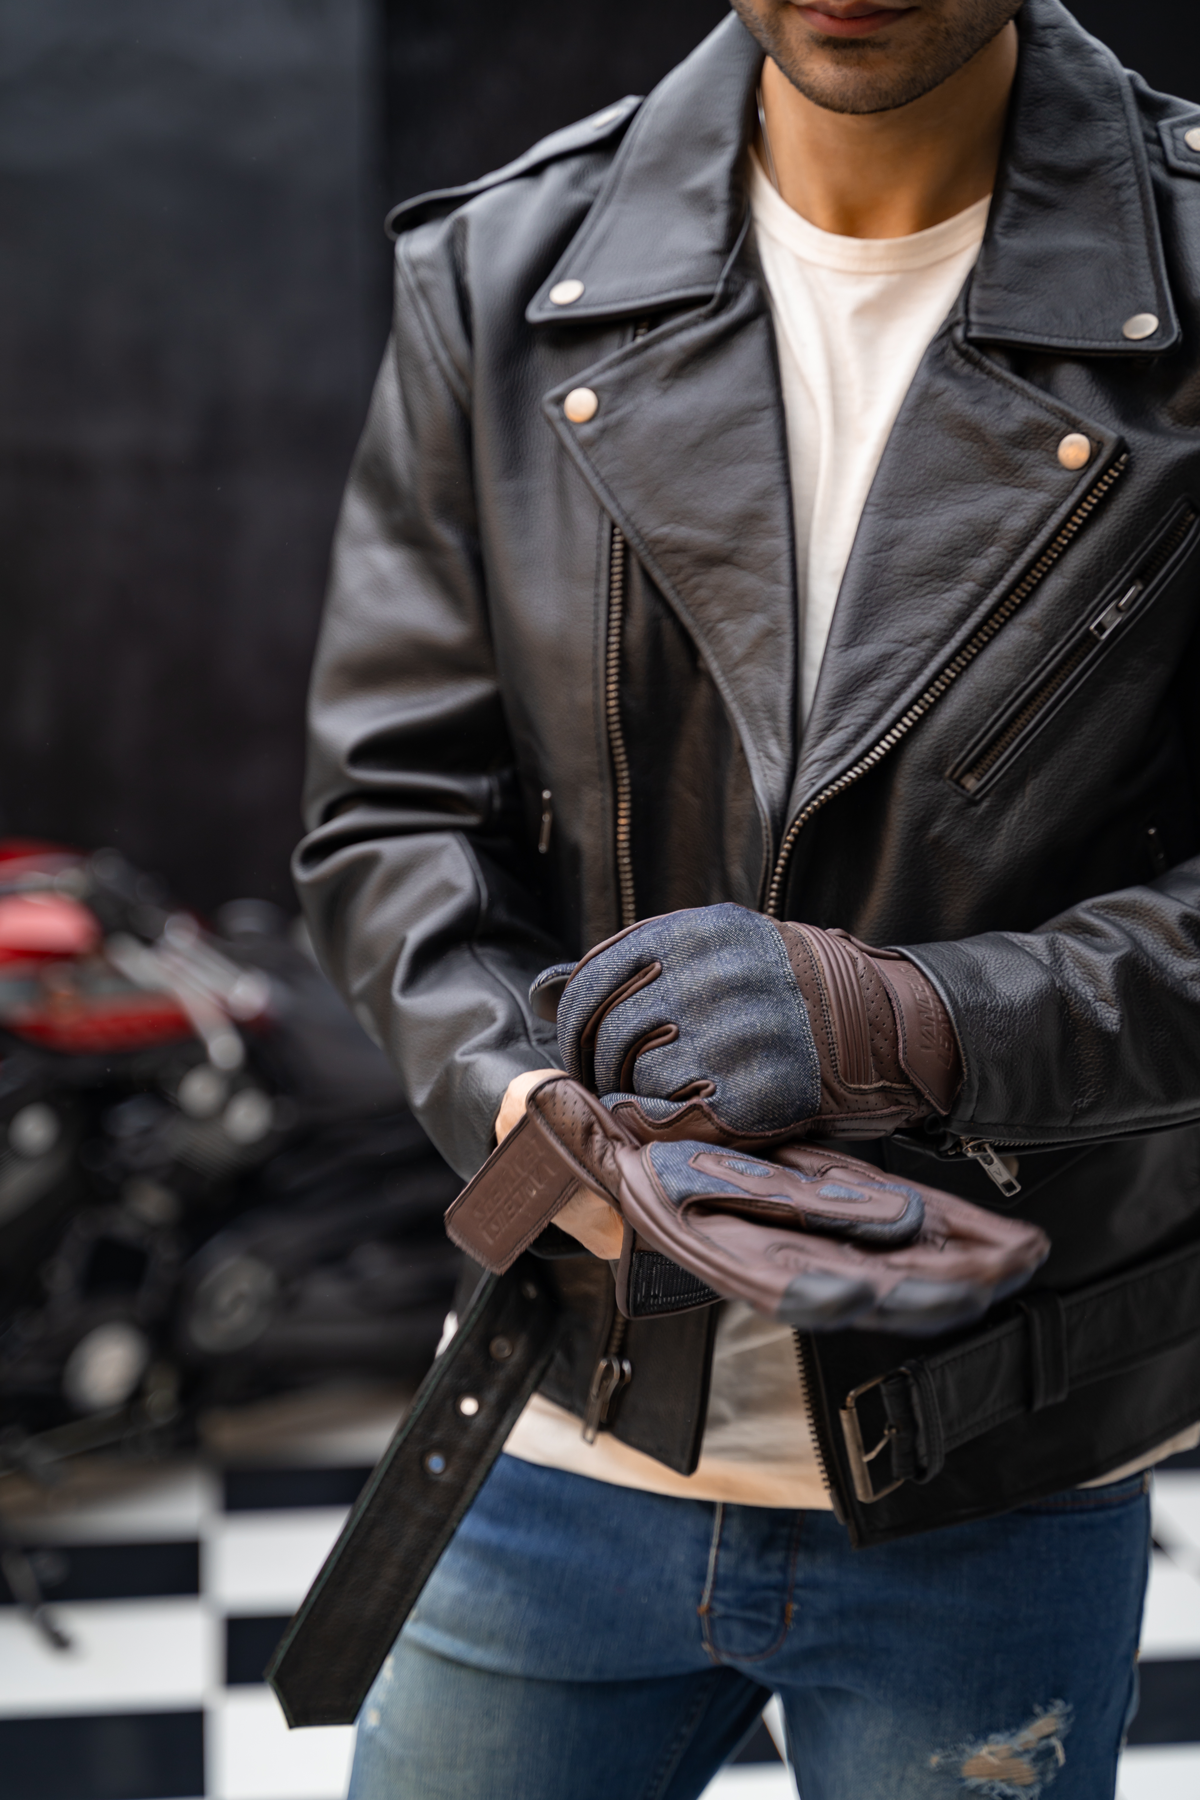 Vance Leather Men's Top Grain Leather Classic Motorcycle Jacket W/Lace Sides and Zip Out Liner